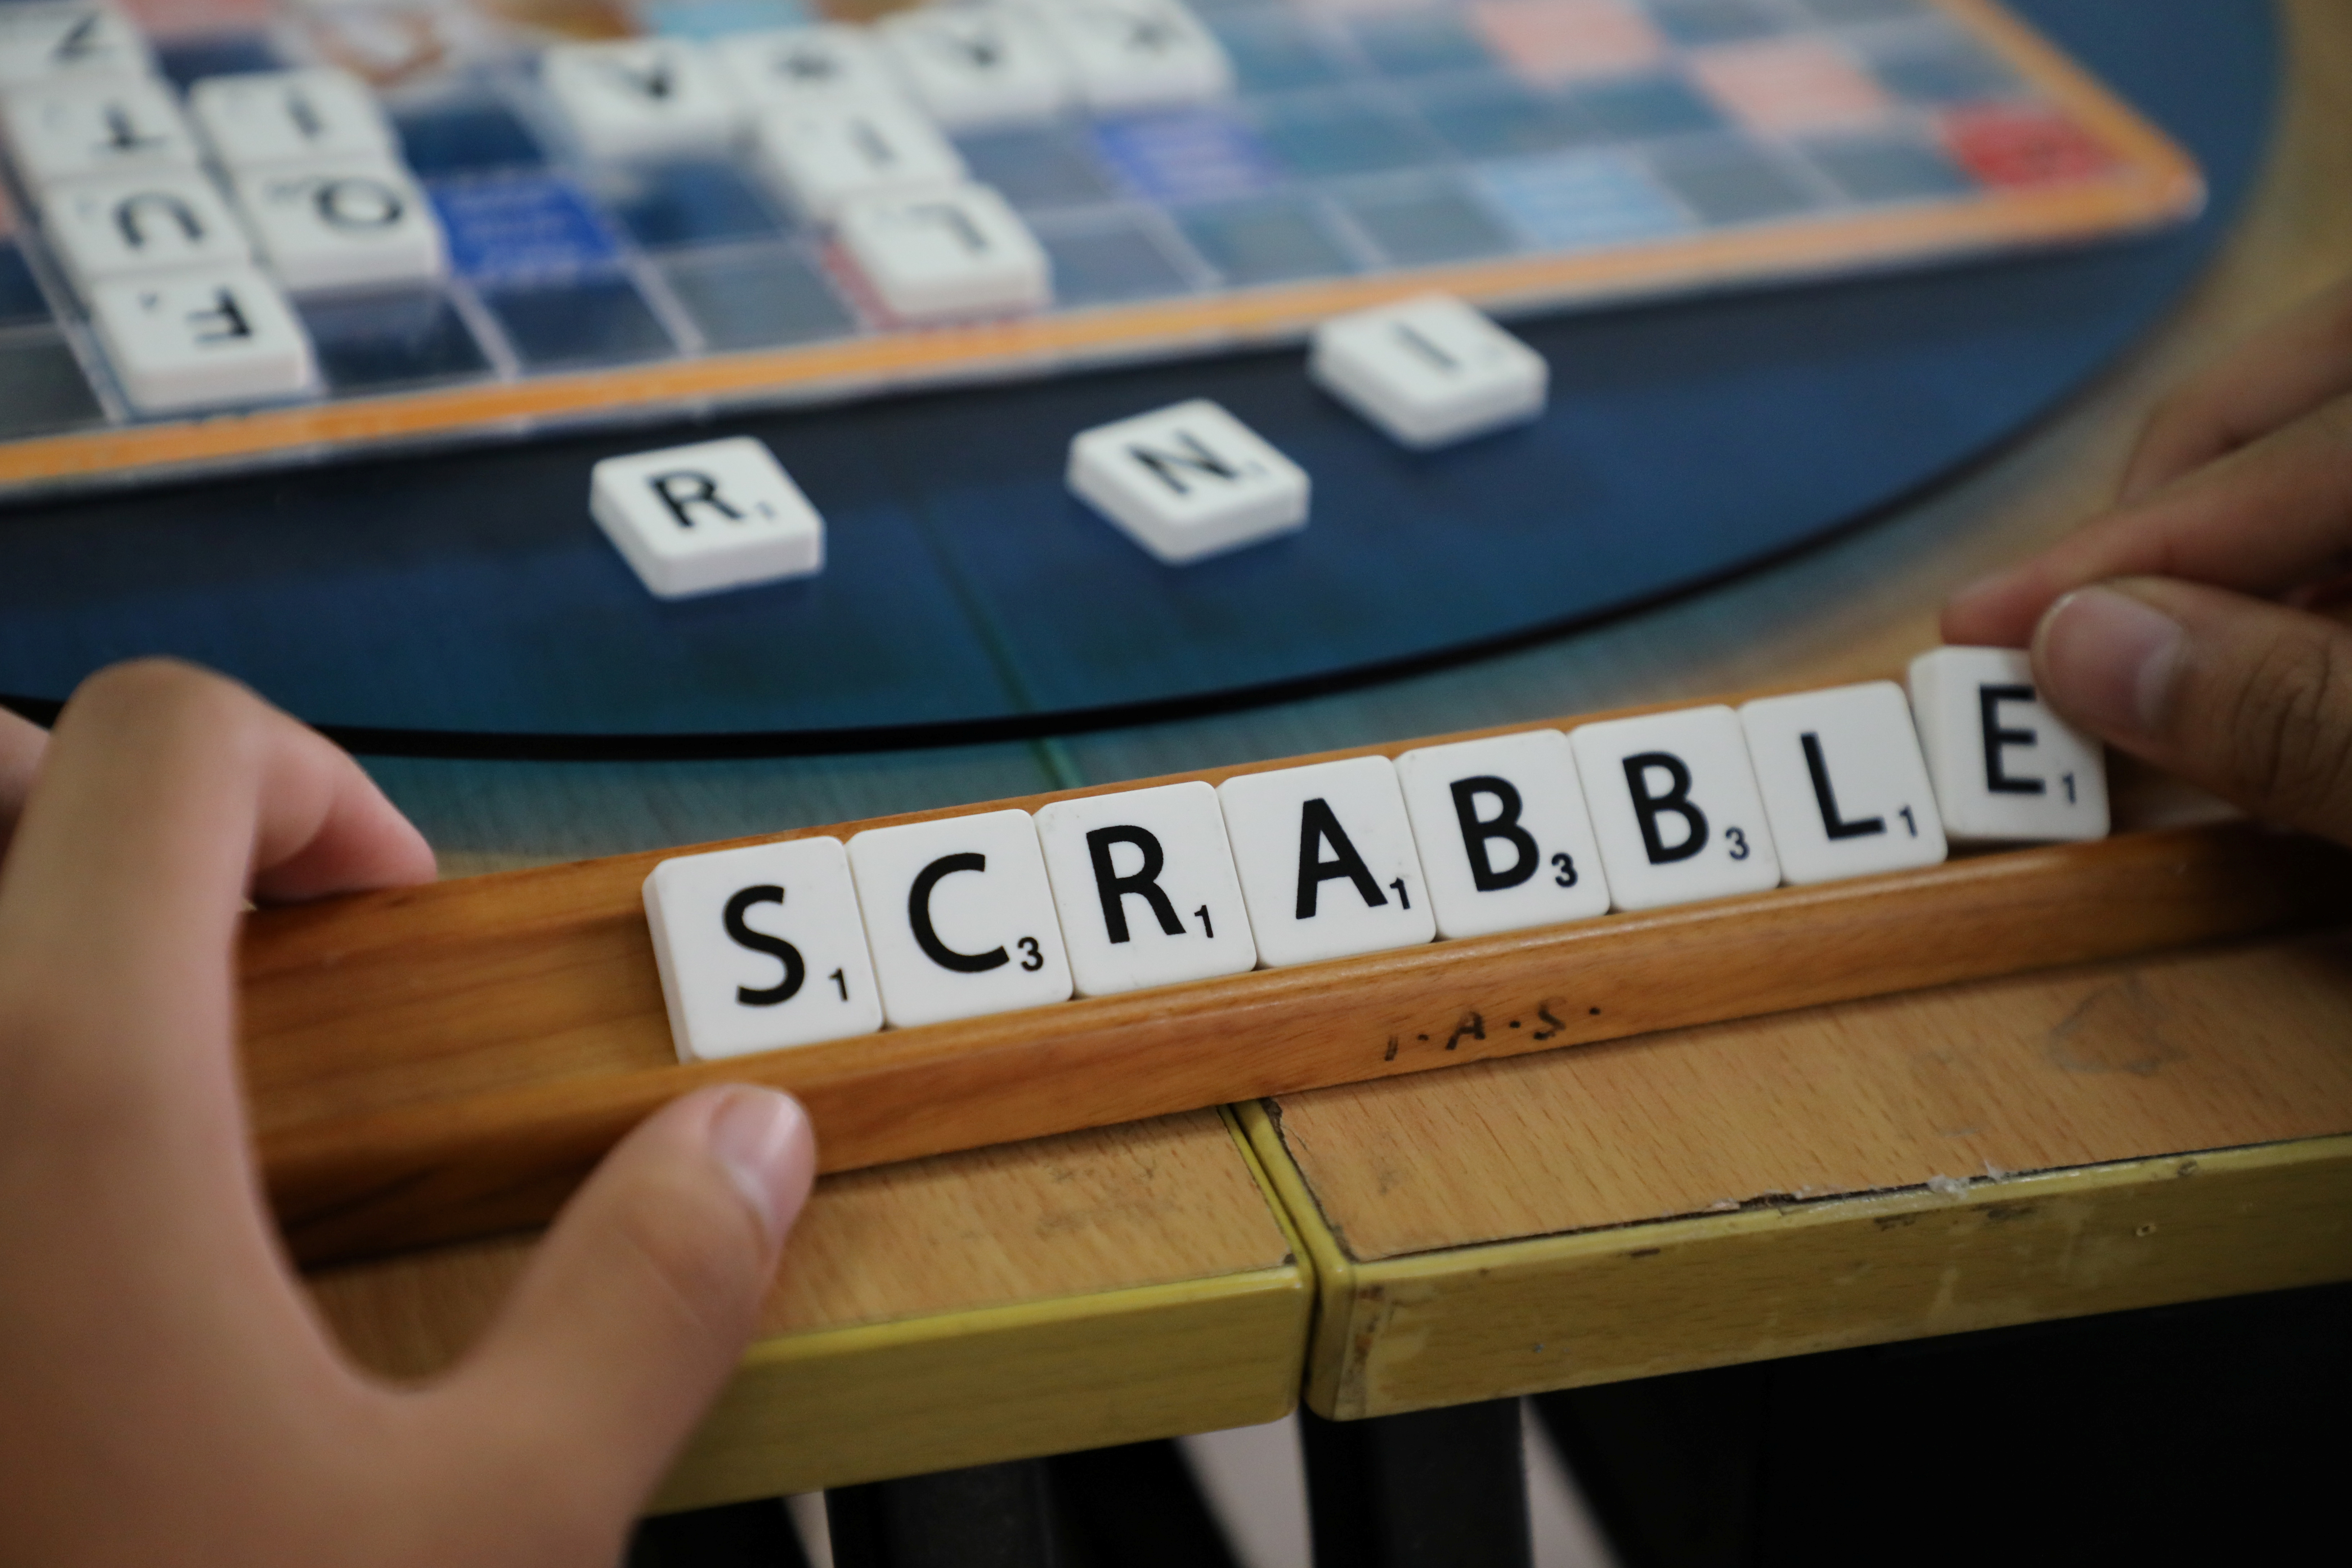 A player forms the word "Scrabble" with tiles during a practice session, in this posed picture taken in Kuala Lumpur, Malaysia